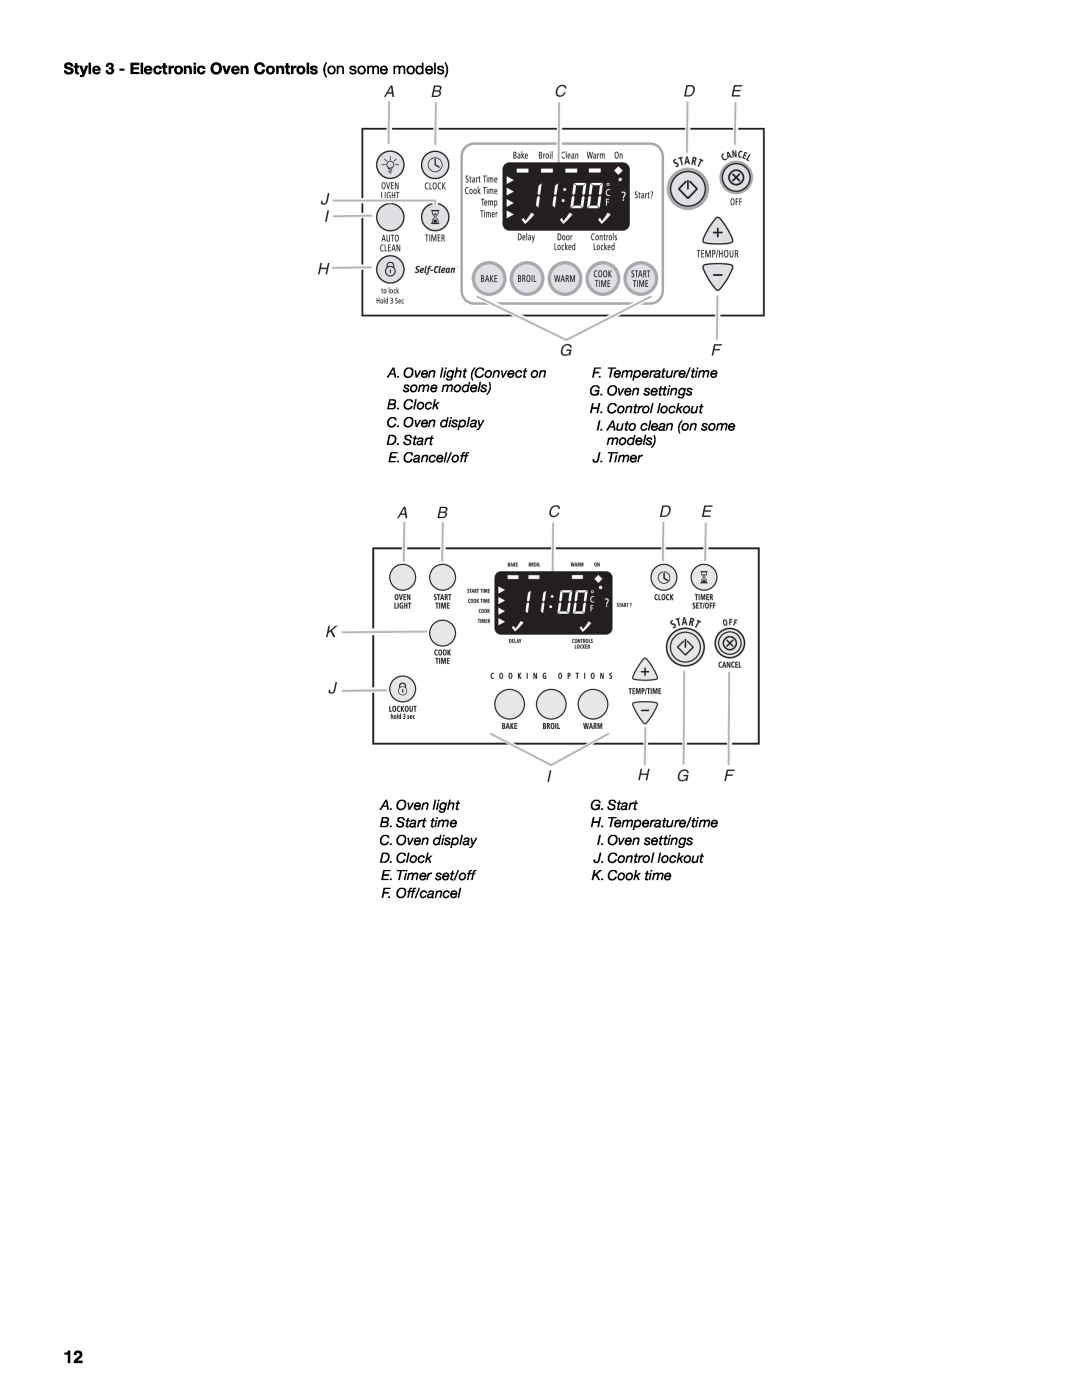 Whirlpool GR563LXSB0 manual A Bcd E J I H, Style 3 - Electronic Oven Controls on some models, H. Temperature/time 